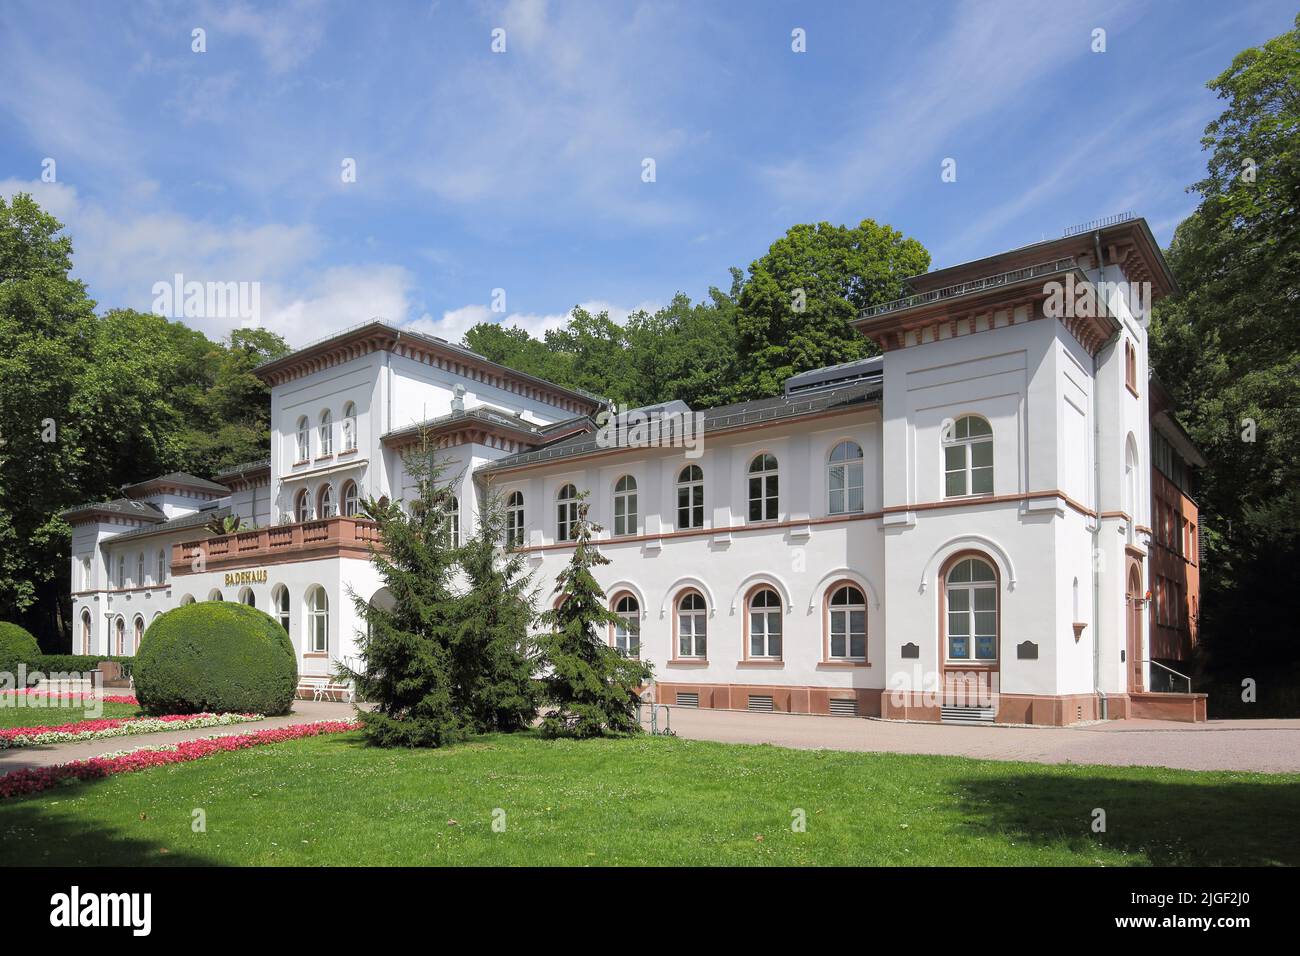 Neo-Renaissance bath house built in 1870 in Bad Soden, Taunus, Hesse, Germany Stock Photo